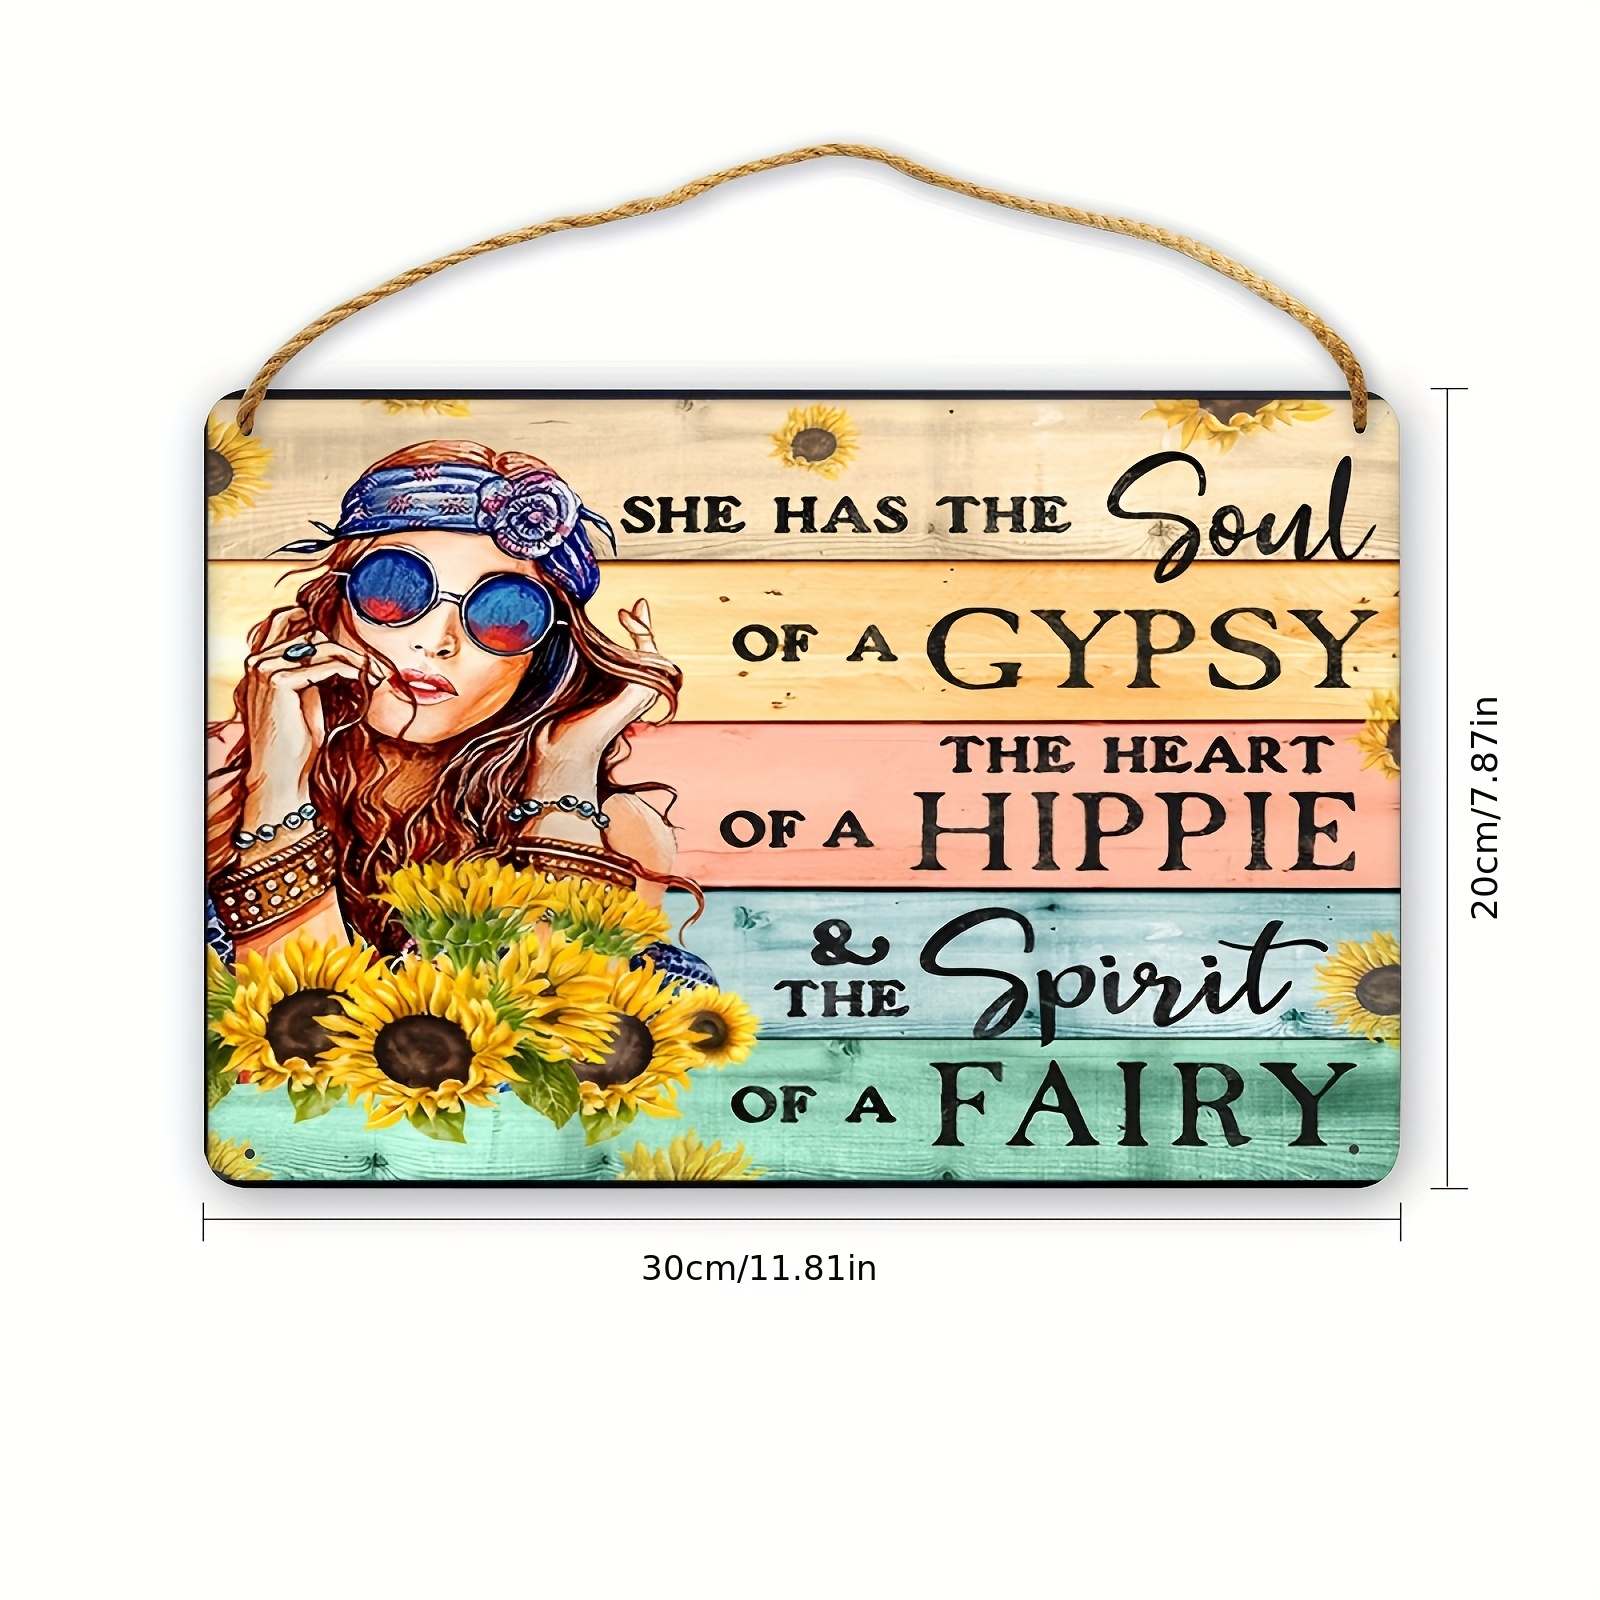 Hippie Boho Positive Quotes Wall Decor - Inspirational Motivational Wall  Art Poster - Encouragement Gifts for Women - Bohemian Rustic Country